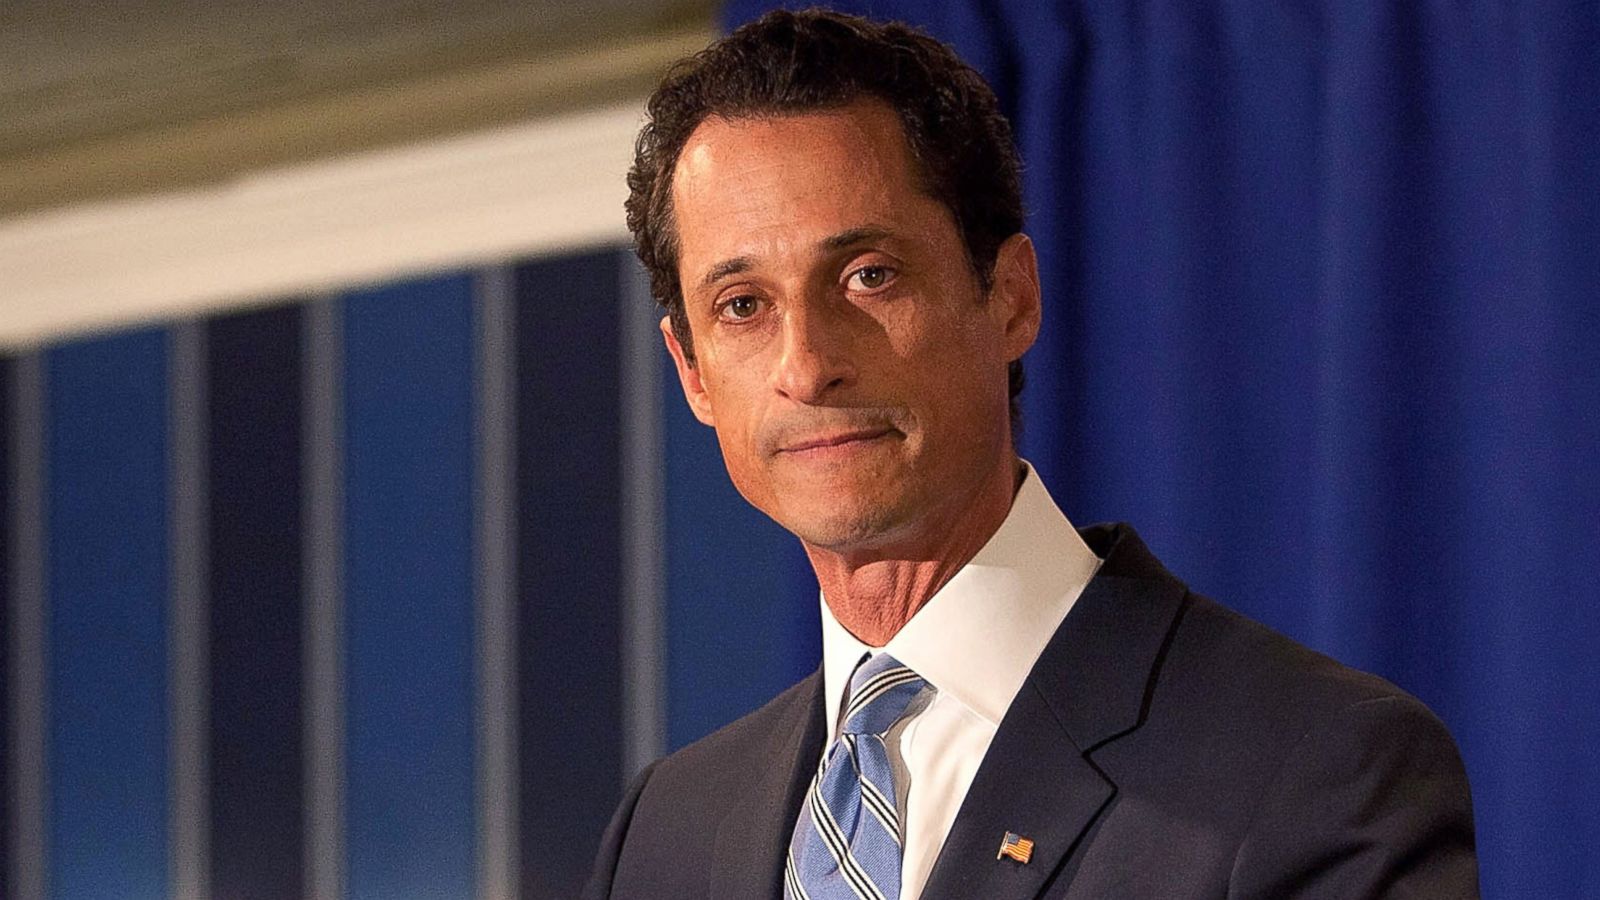 Anthony Weiner is Currently Looking to Sell His Records on NFTs to Make Some Money